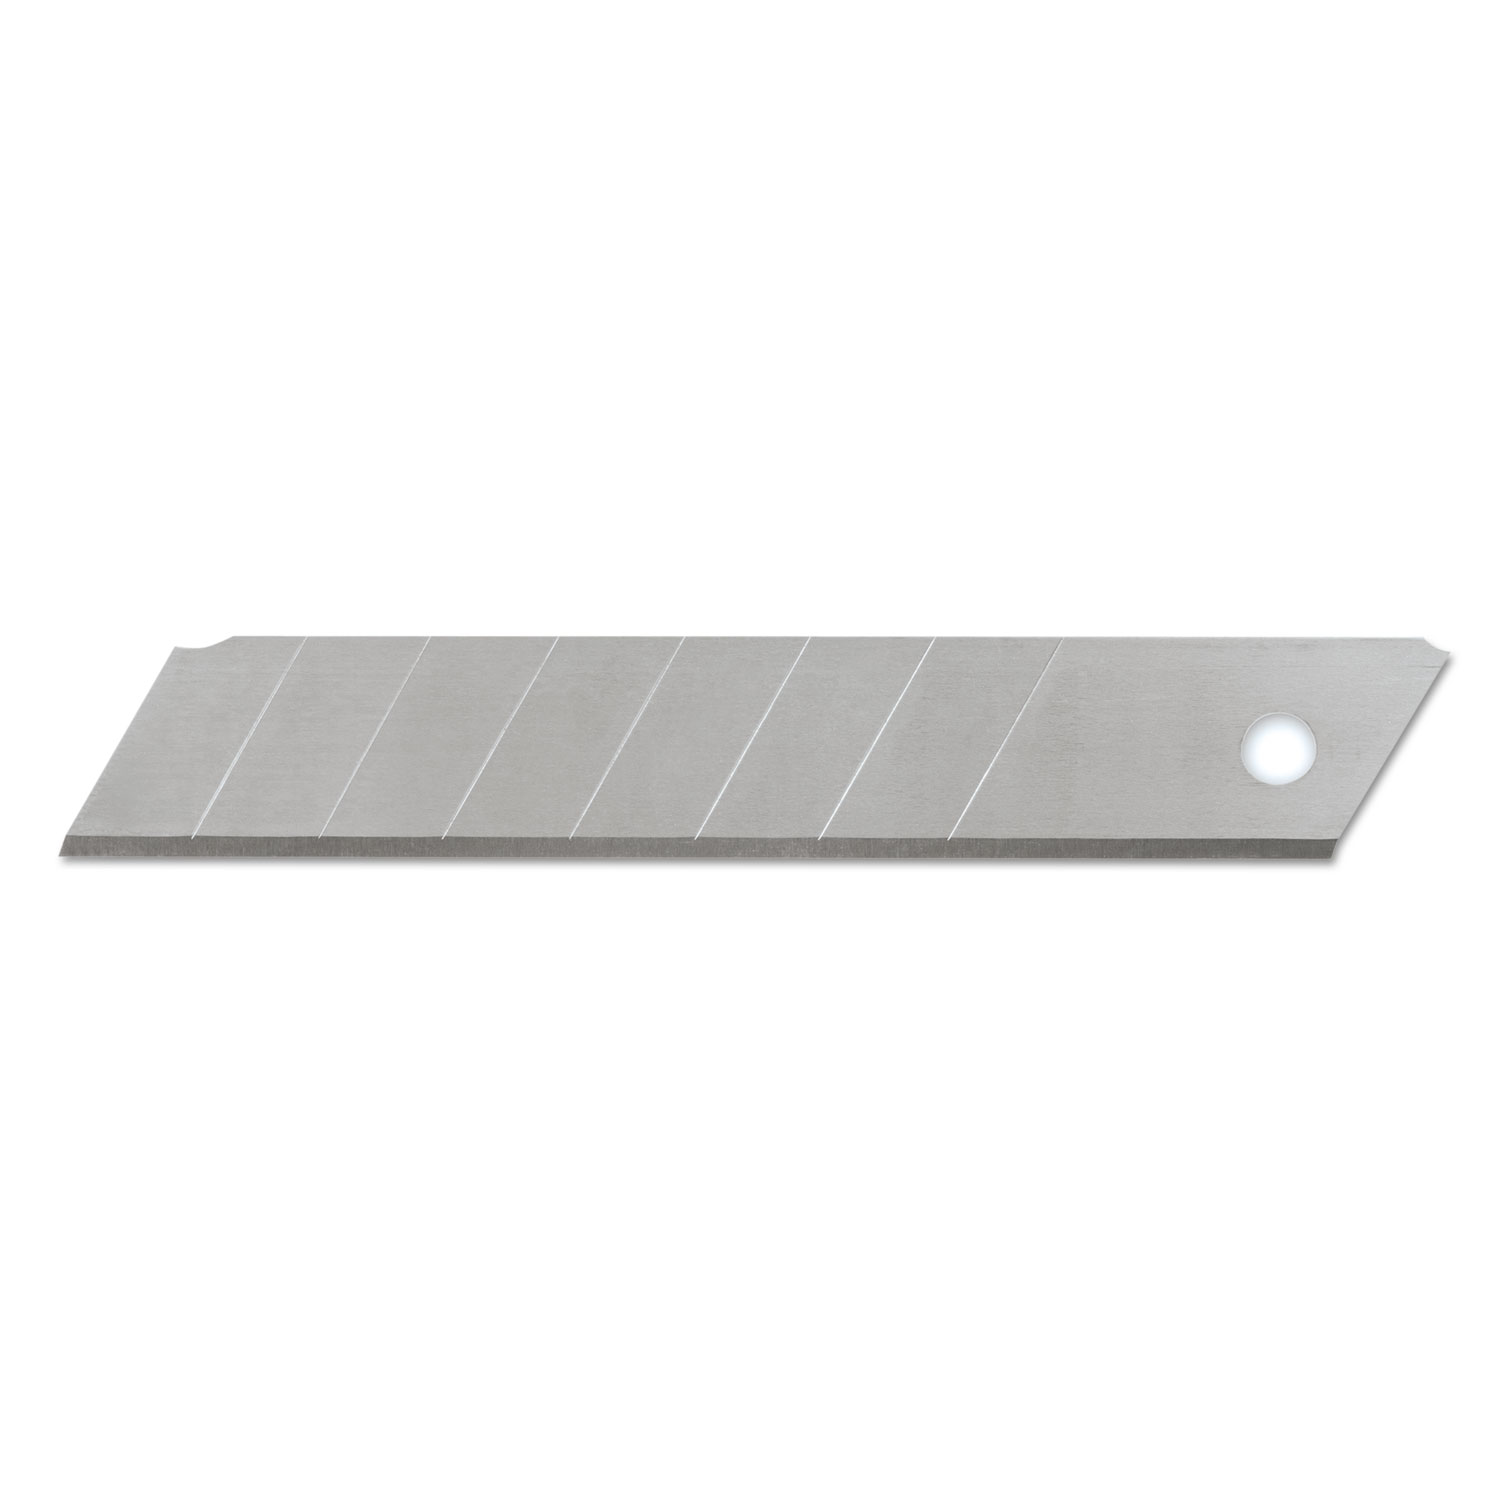  COSCO 091471 Snap Blade Utility Knife Replacement Blades, 10/Pack (COS091471) 